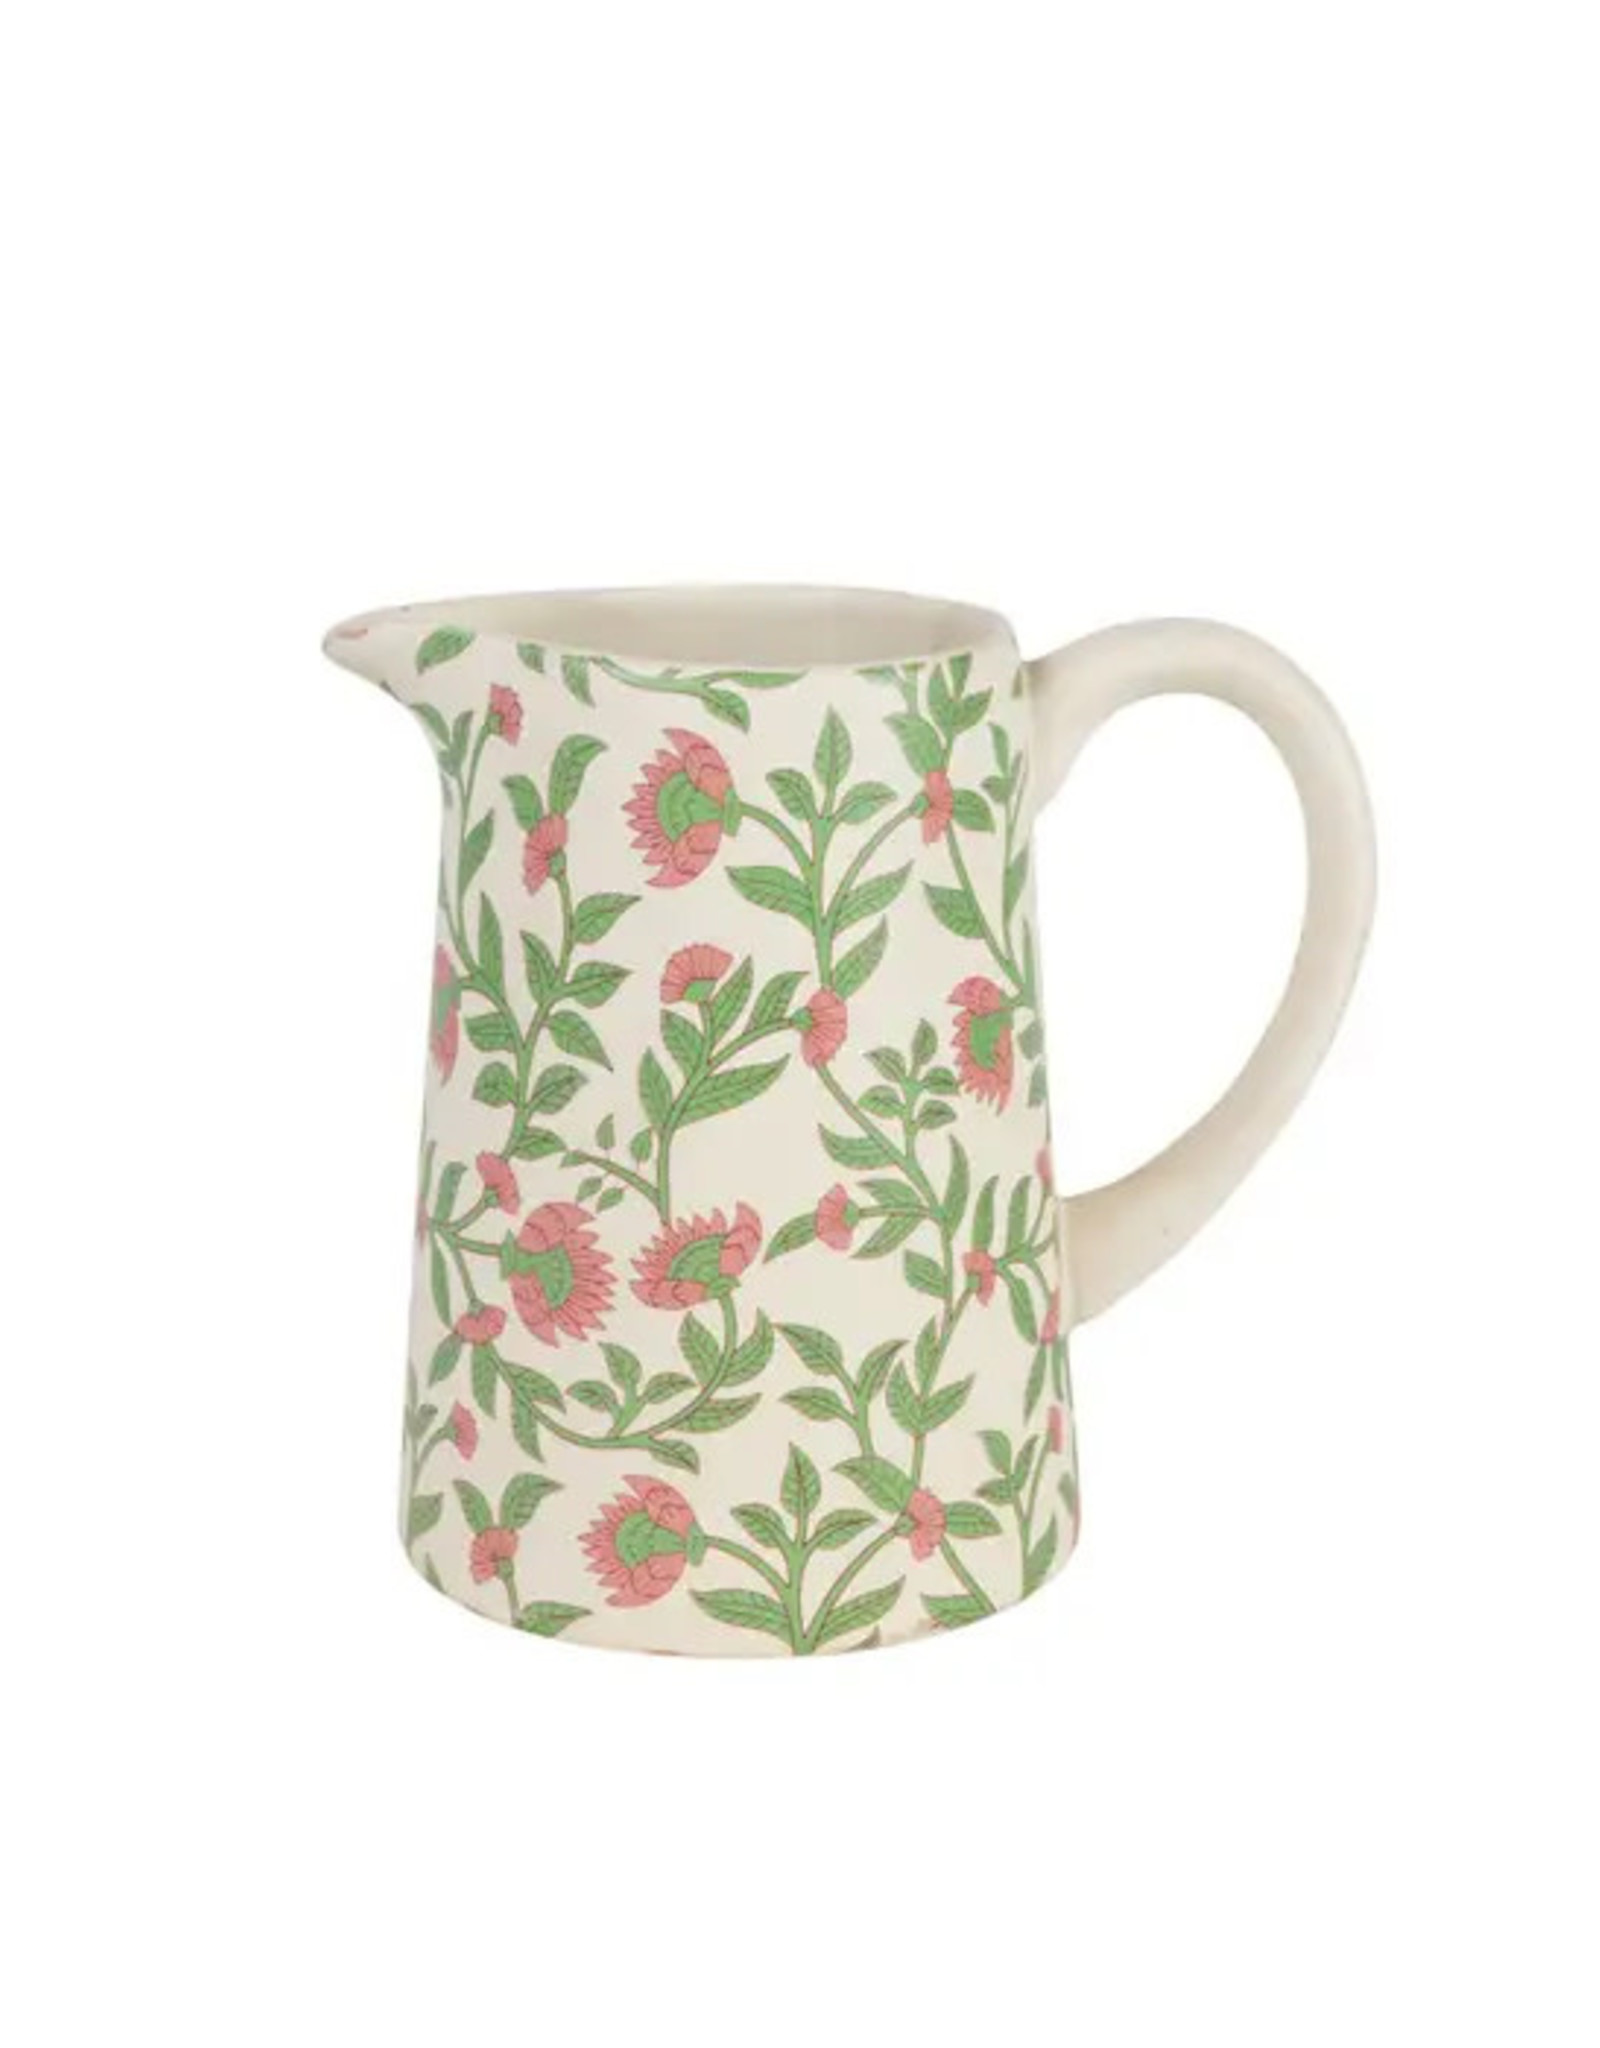 Ten Thousand Villages Blooming Vines Pitcher